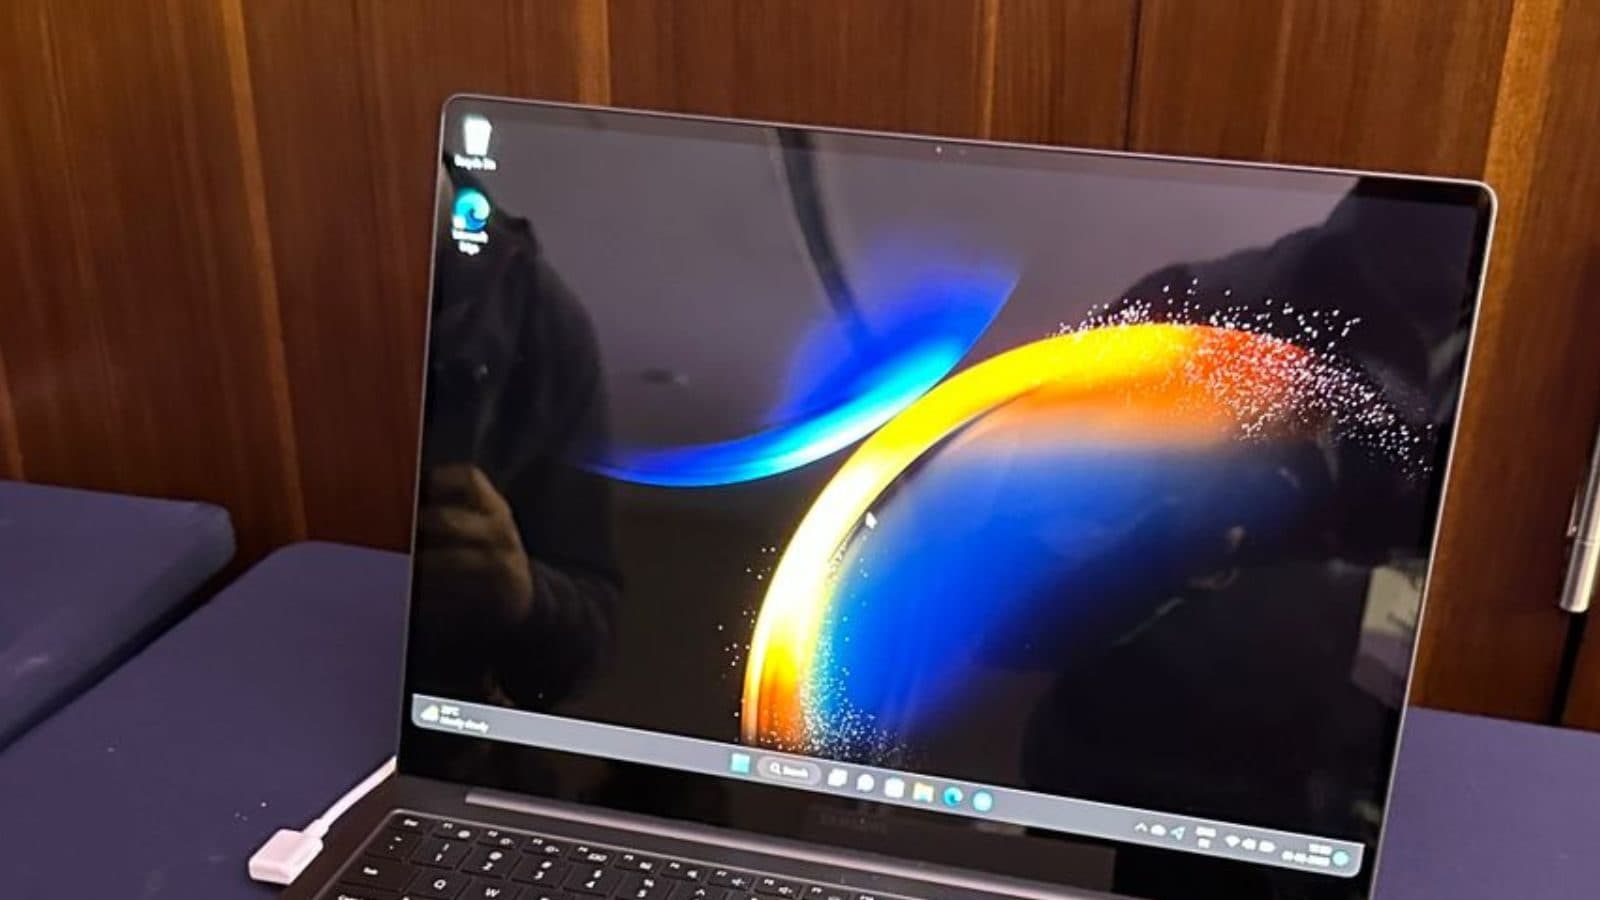 Samsung Launches Galaxy Book 3 Series Laptops At Unpacked Event: Availability & Specifications